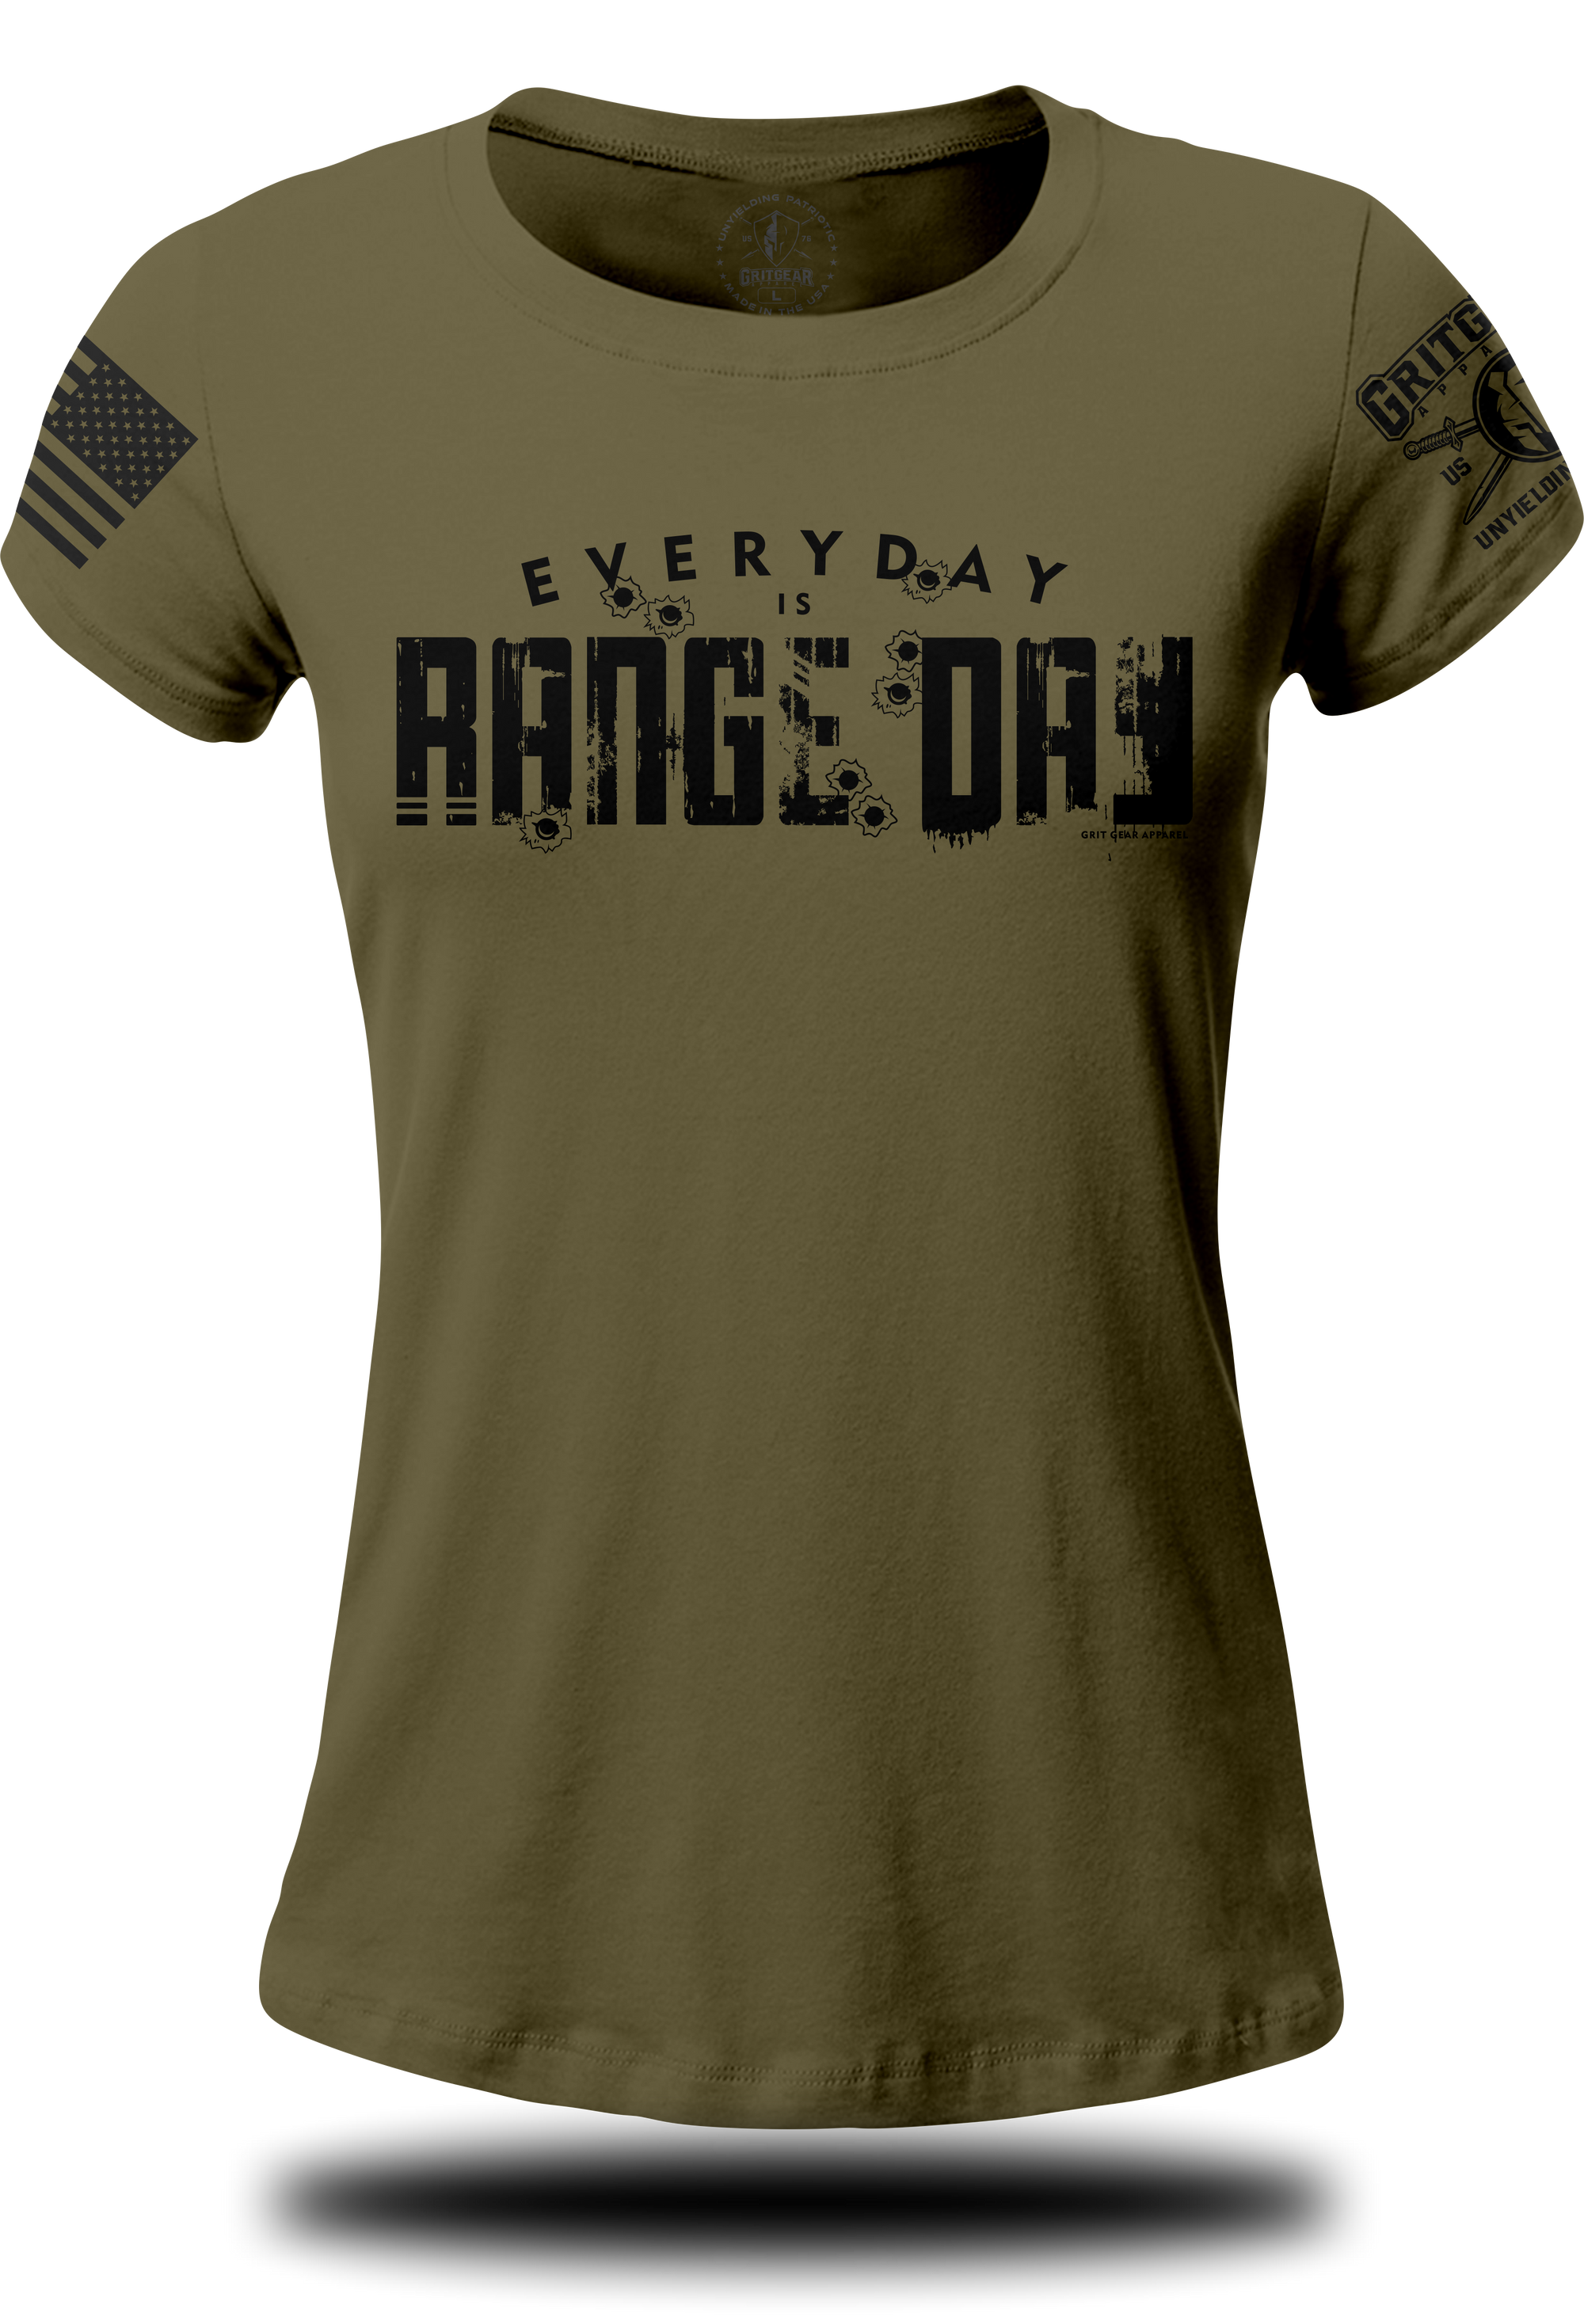 Everyday is Range Day Ladies T-shirt | Grit Gear Apparel®